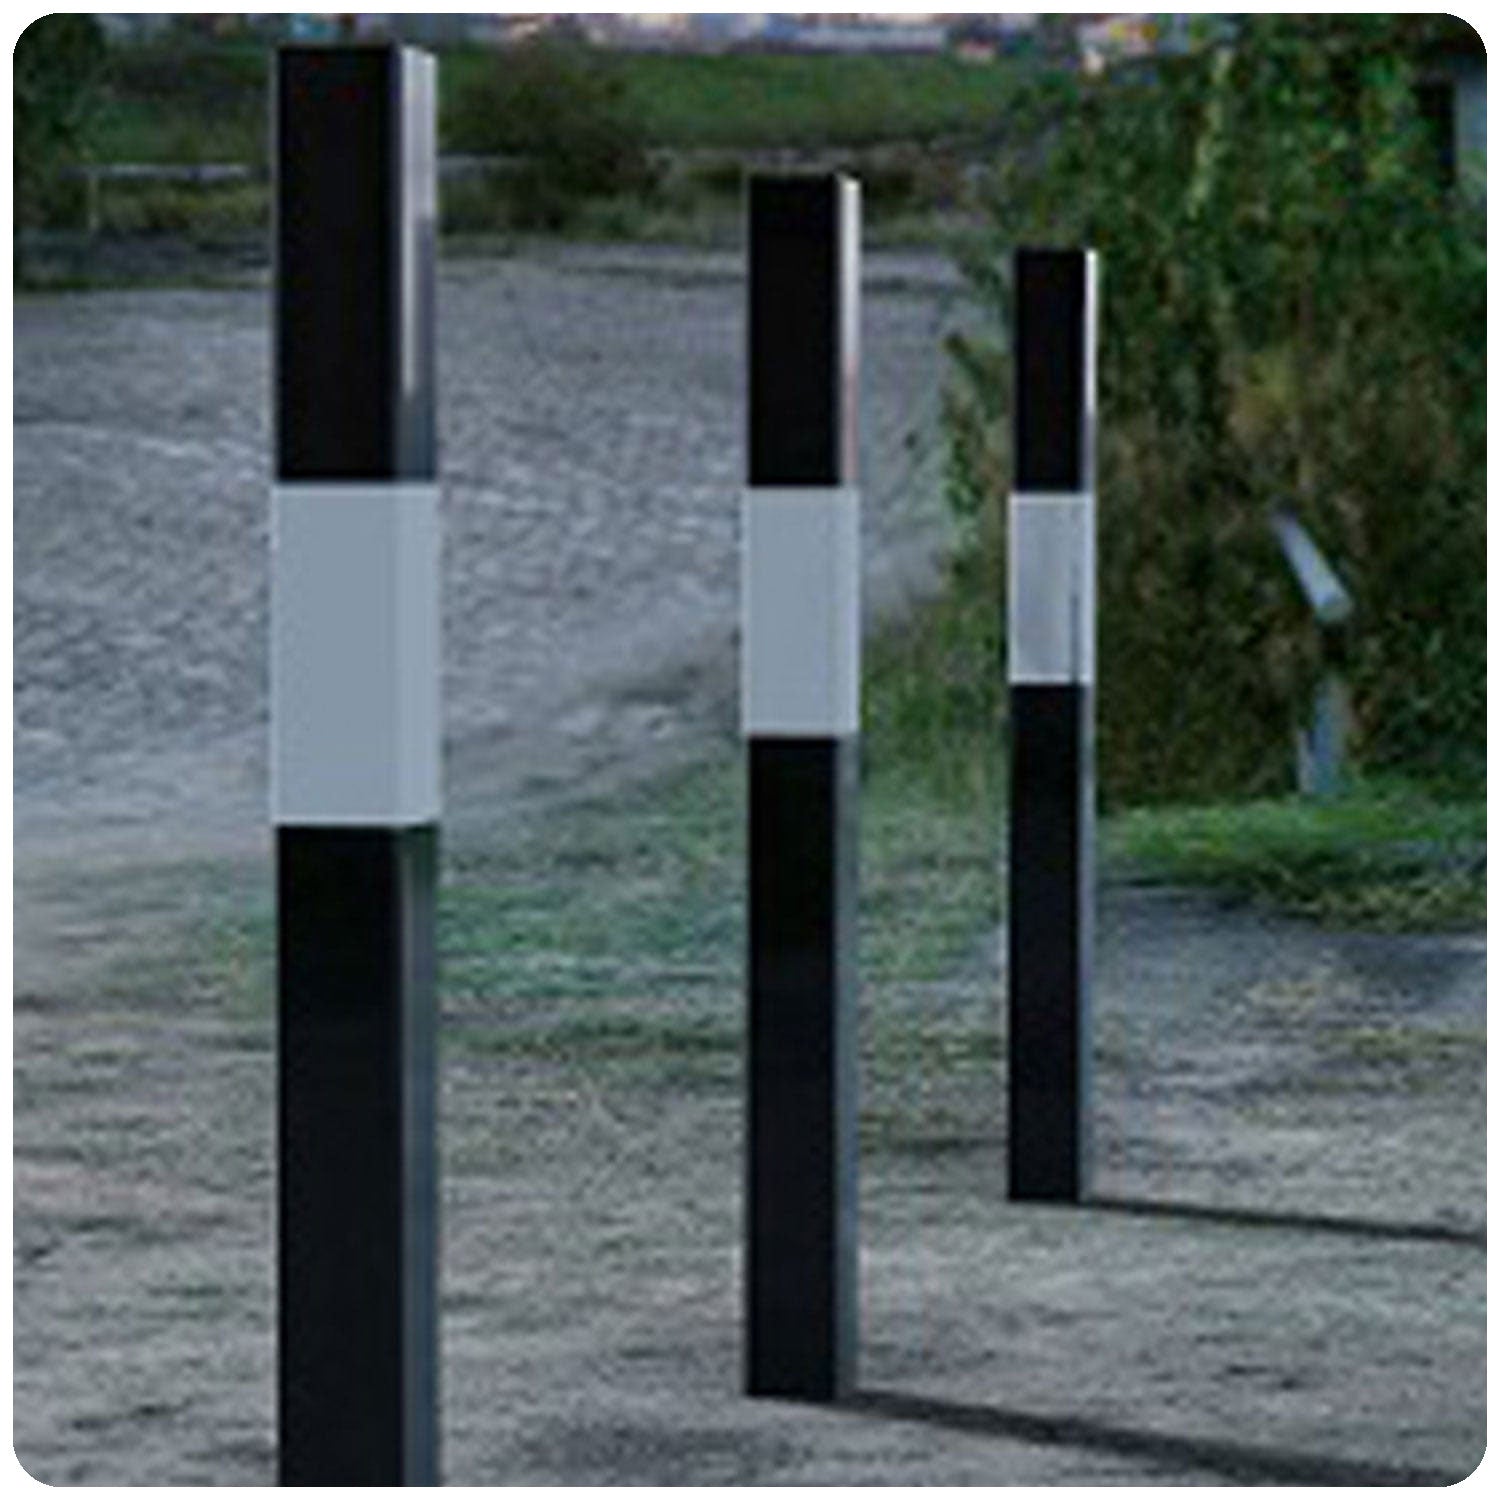 black-white-square-fixed-bollard-crash-impact-high-anti-ram-vehicle-safety-perimeter-security-crash-tested-heavy-duty-outdoor-street-furniture-pedestrian-modern-urban-public-space-carpark-building-protection-commercial-industrial